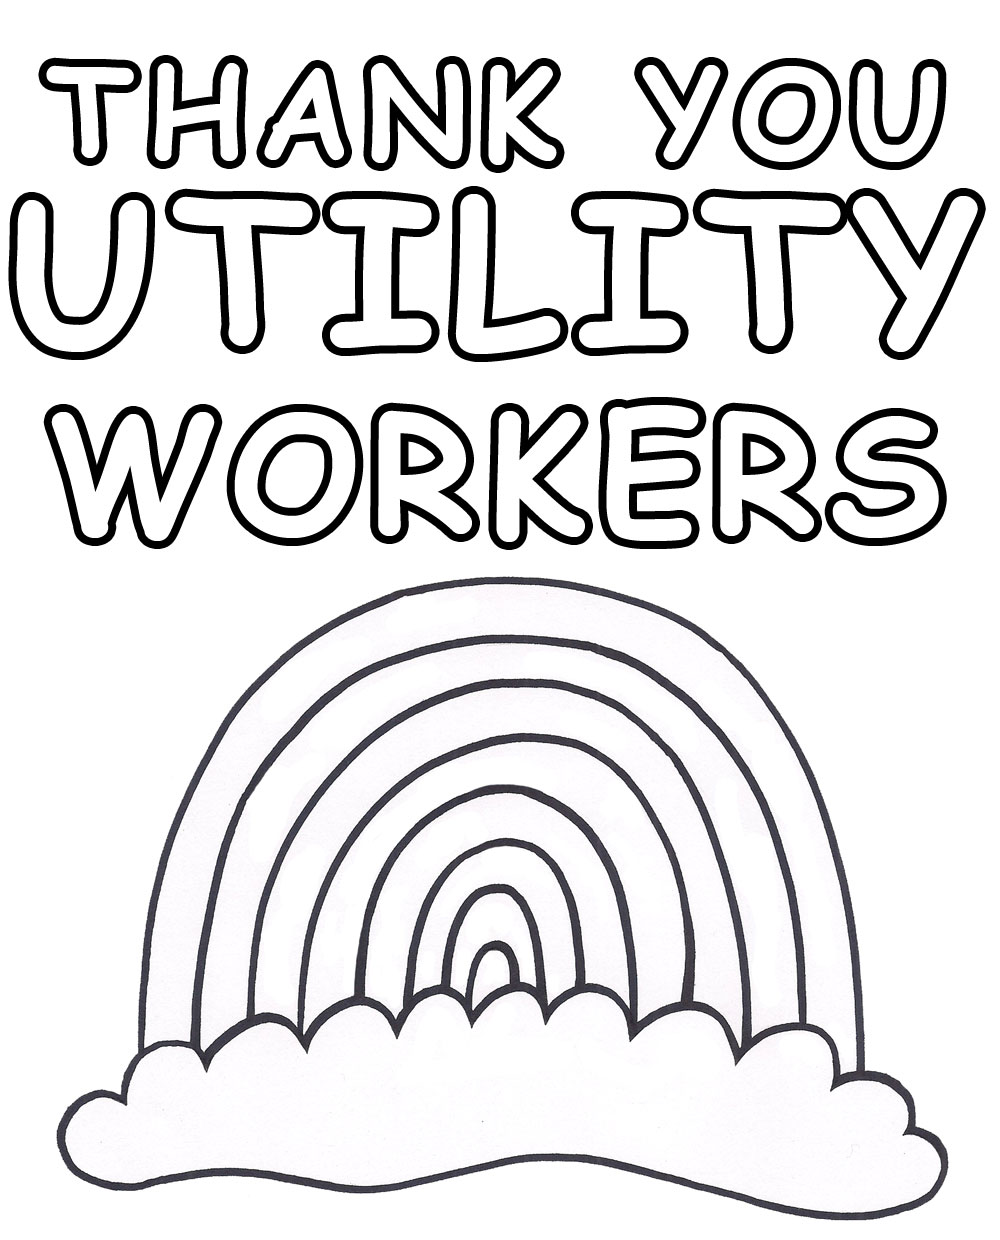 A printable poster for children to colour in to say thank you to utility workers